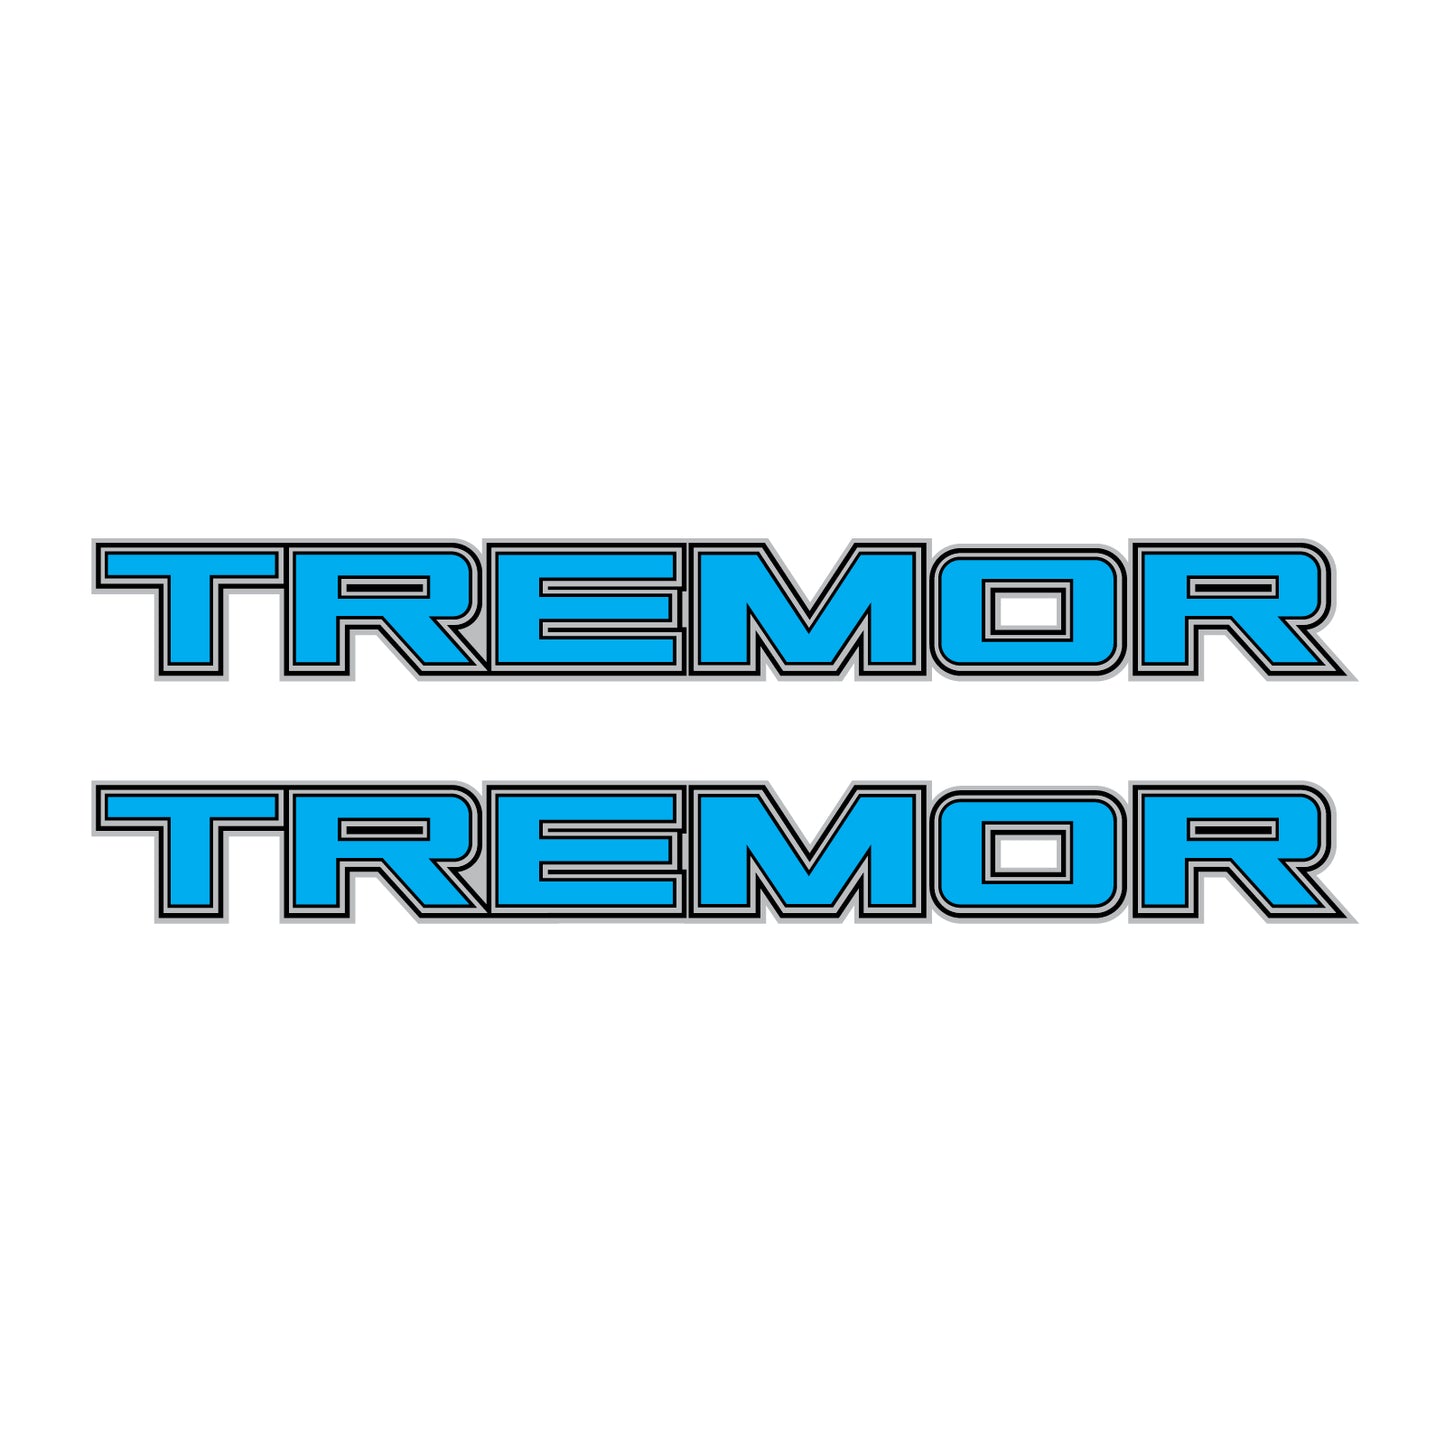 Tremor Decals Truck Bed Side Stickers Ford F150 F250 - TiresFX